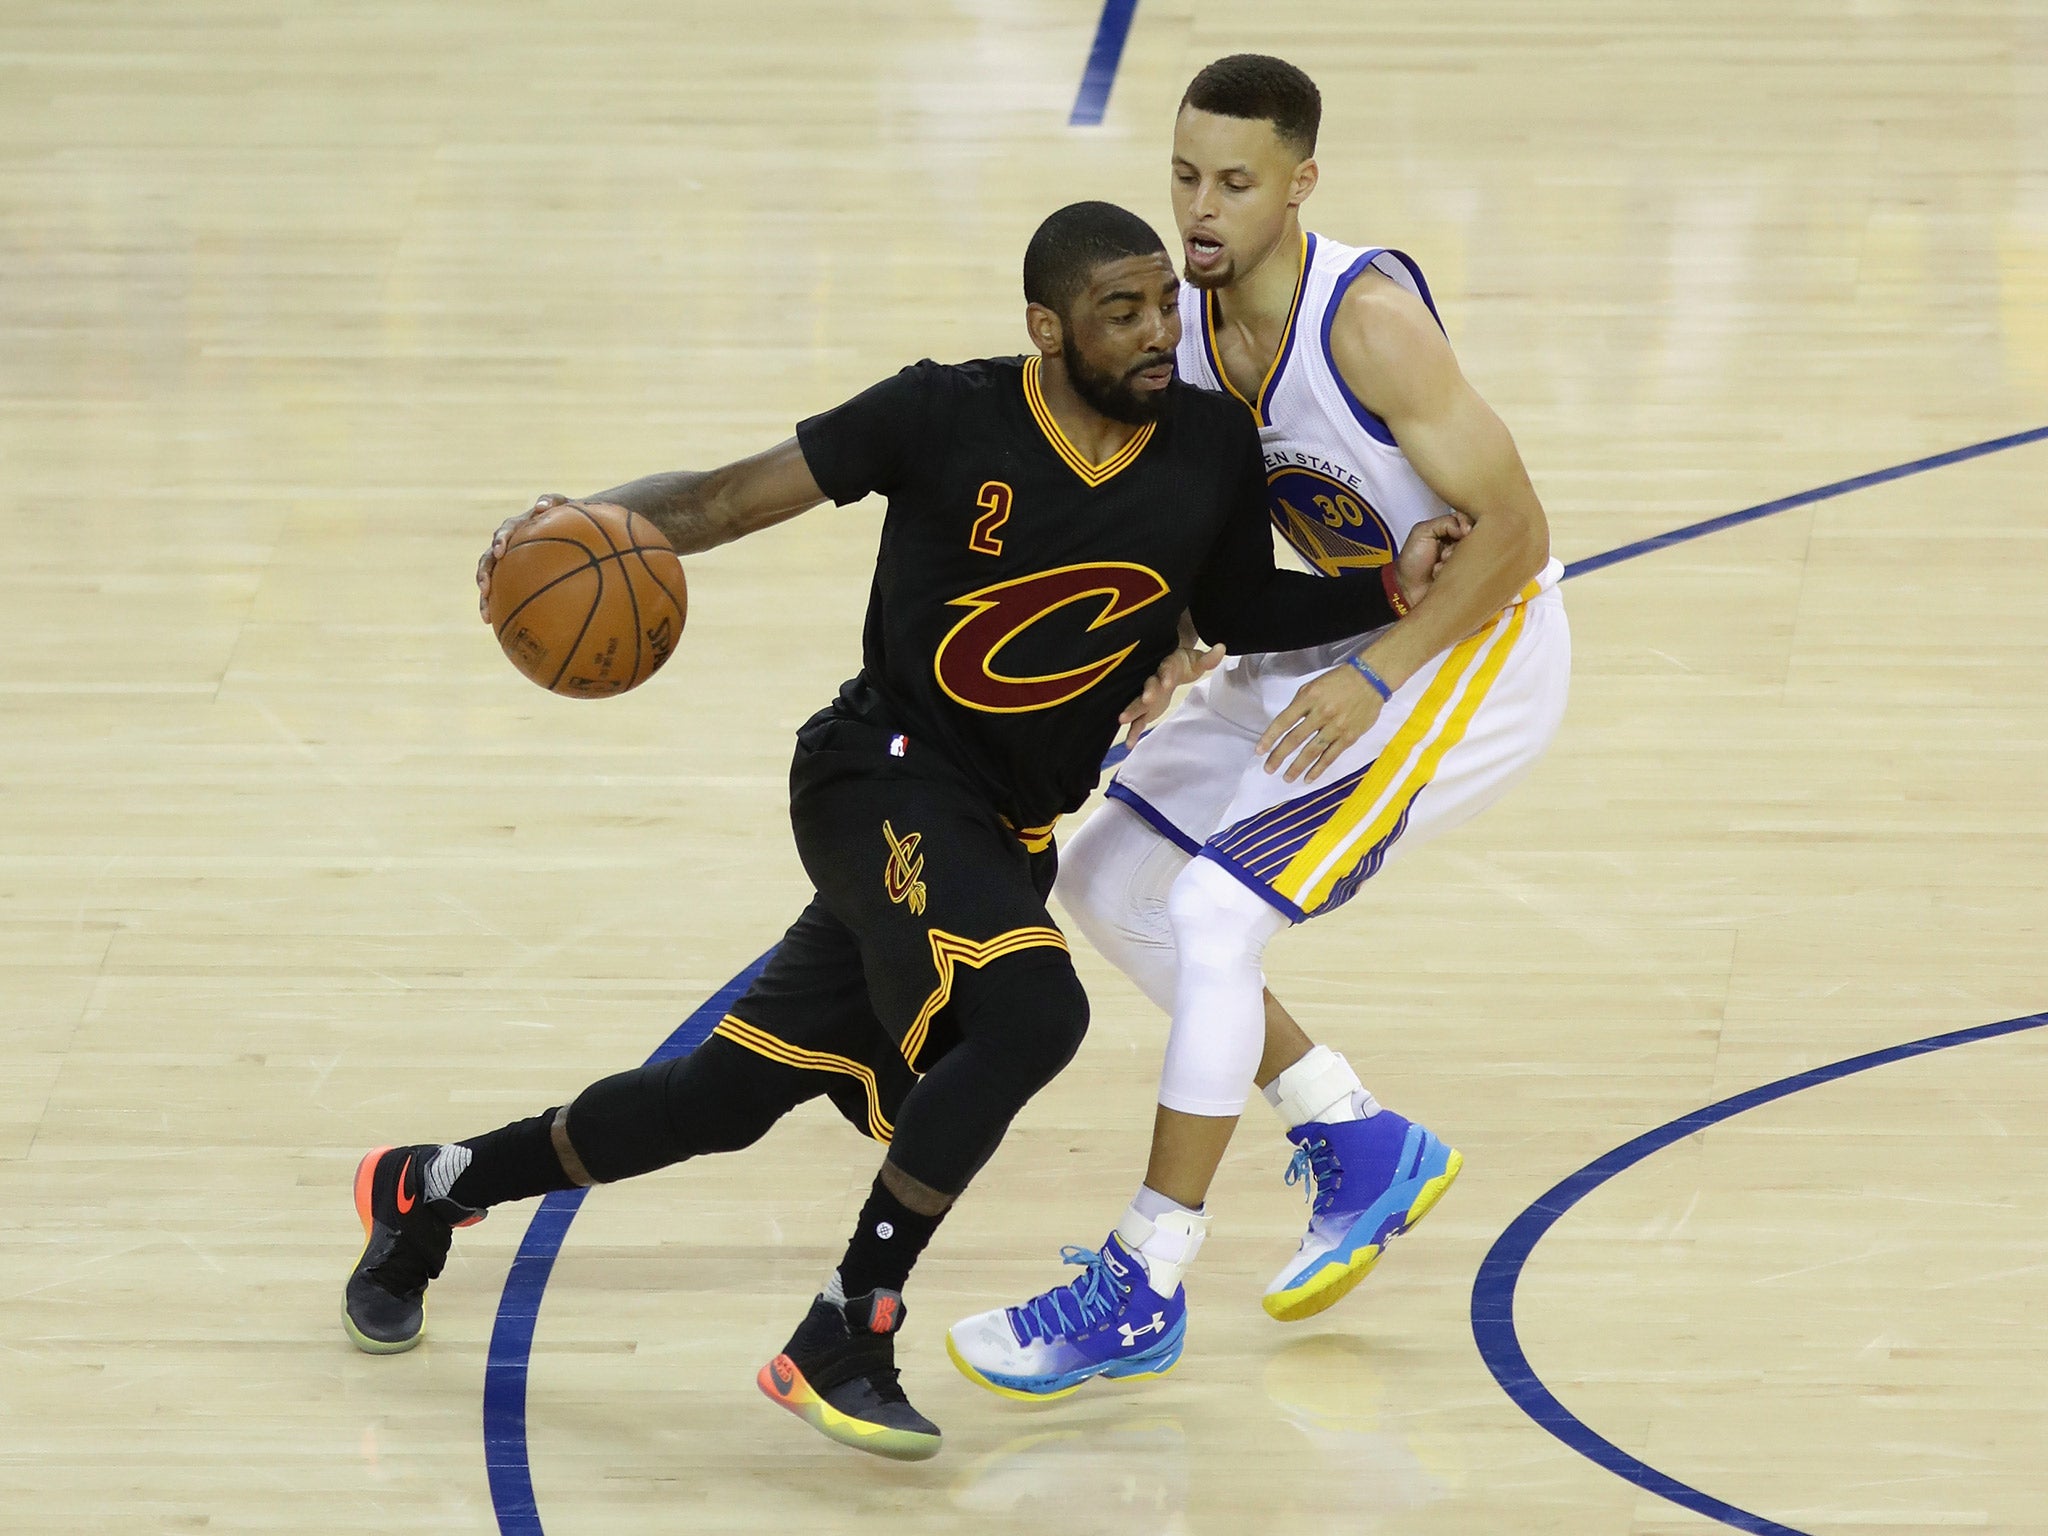 James and Irving sizzle as Cavaliers beat Warriors to keep NBA